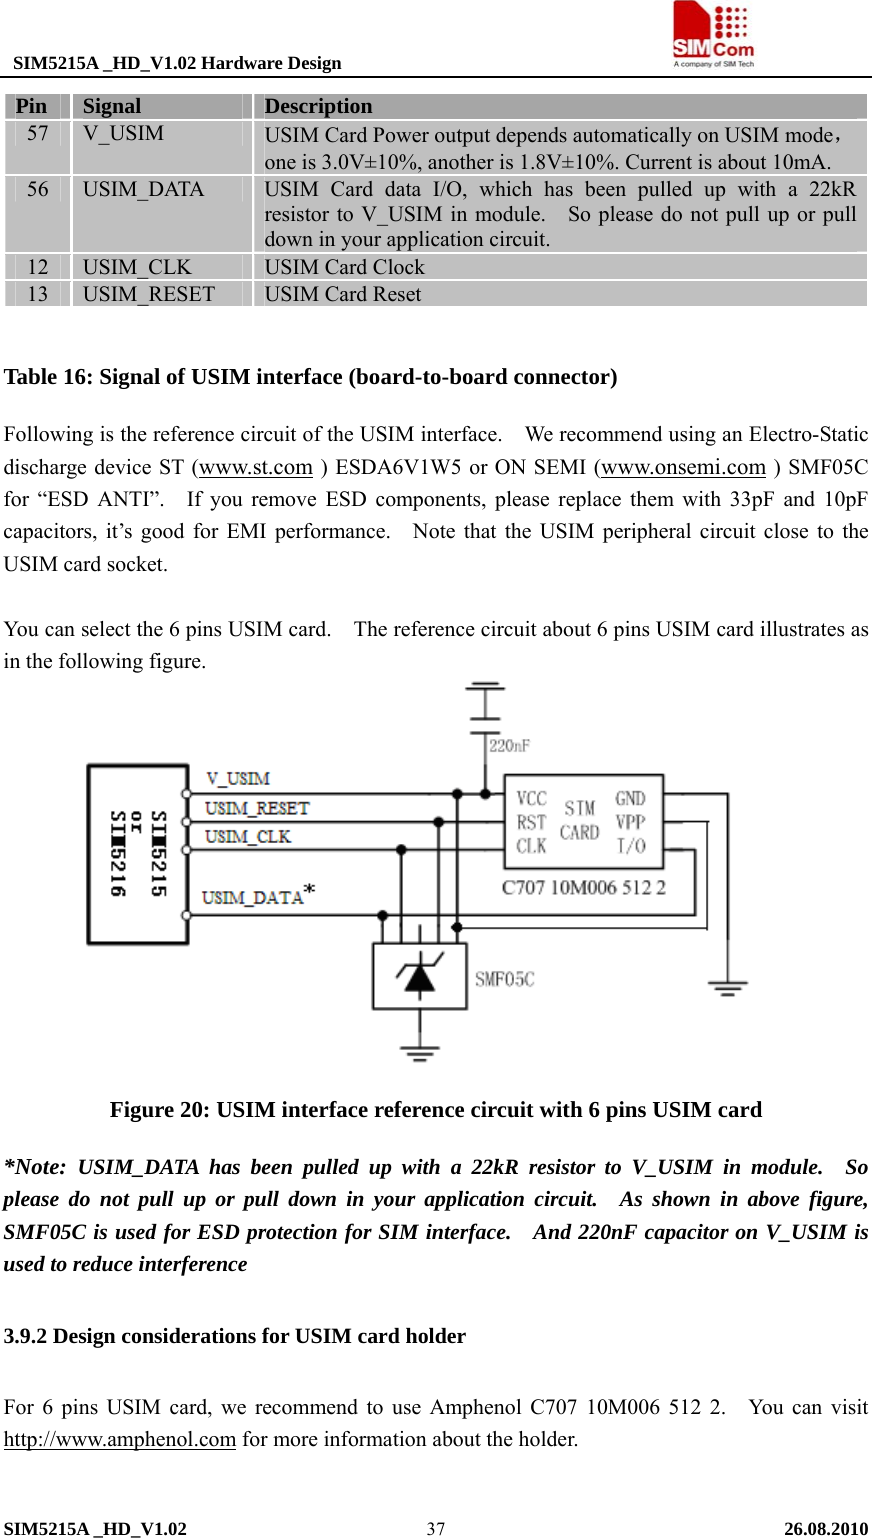  SIM5215A _HD_V1.02 Hardware Design                                     SIM5215A _HD_V1.02   26.08.2010   37Table 16: Signal of USIM interface (board-to-board connector) Following is the reference circuit of the USIM interface.    We recommend using an Electro-Static discharge device ST (www.st.com ) ESDA6V1W5 or ON SEMI (www.onsemi.com ) SMF05C for “ESD ANTI”.   If you remove ESD components, please replace them with 33pF and 10pF capacitors, it’s good for EMI performance.    Note that the USIM peripheral circuit close to the USIM card socket.  You can select the 6 pins USIM card.    The reference circuit about 6 pins USIM card illustrates as in the following figure.  Figure 20: USIM interface reference circuit with 6 pins USIM card *Note:  USIM_DATA has been pulled up with a 22kR resistor to V_USIM in module.  So please do not pull up or pull down in your application circuit.  As shown in above figure, SMF05C is used for ESD protection for SIM interface.    And 220nF capacitor on V_USIM is used to reduce interference 3.9.2 Design considerations for USIM card holder   For 6 pins USIM card, we recommend to use Amphenol C707 10M006 512 2.   You can visit http://www.amphenol.com for more information about the holder.  Pin  Signal  Description 57  V_USIM  USIM Card Power output depends automatically on USIM mode，one is 3.0V±10%, another is 1.8V±10%. Current is about 10mA. 56  USIM_DATA  USIM Card data I/O, which has been pulled up with a 22kR resistor to V_USIM in module.    So please do not pull up or pull down in your application circuit. 12  USIM_CLK  USIM Card Clock 13  USIM_RESET  USIM Card Reset 